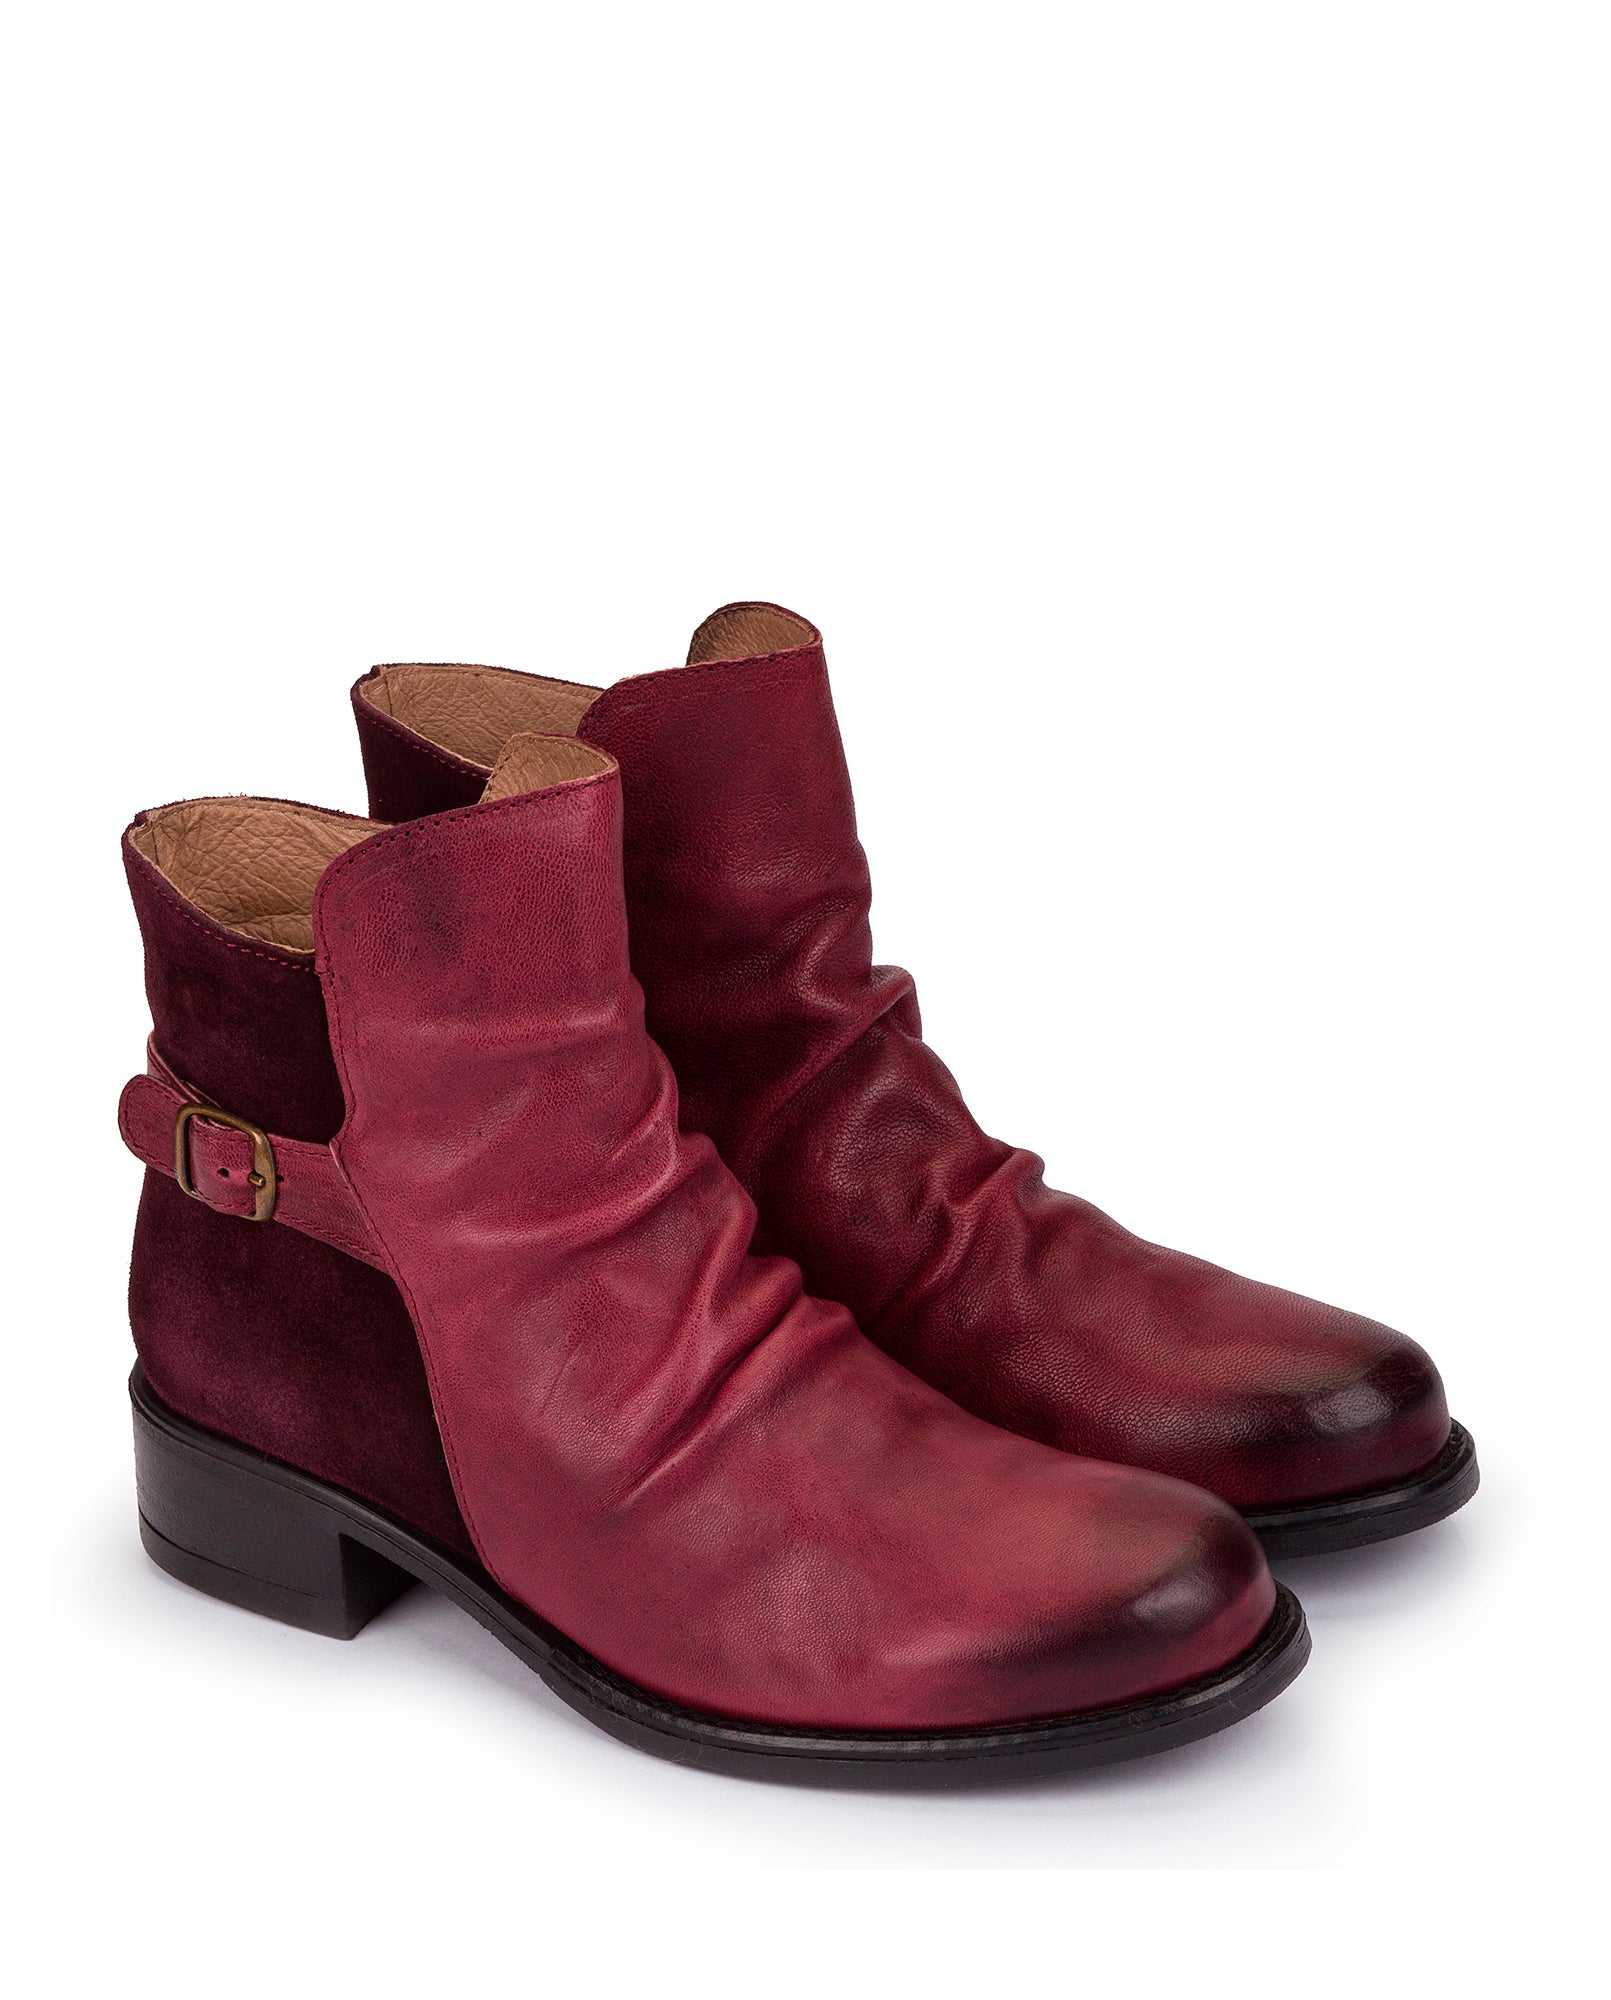 Flat ankle boot MONS-002 burgundy